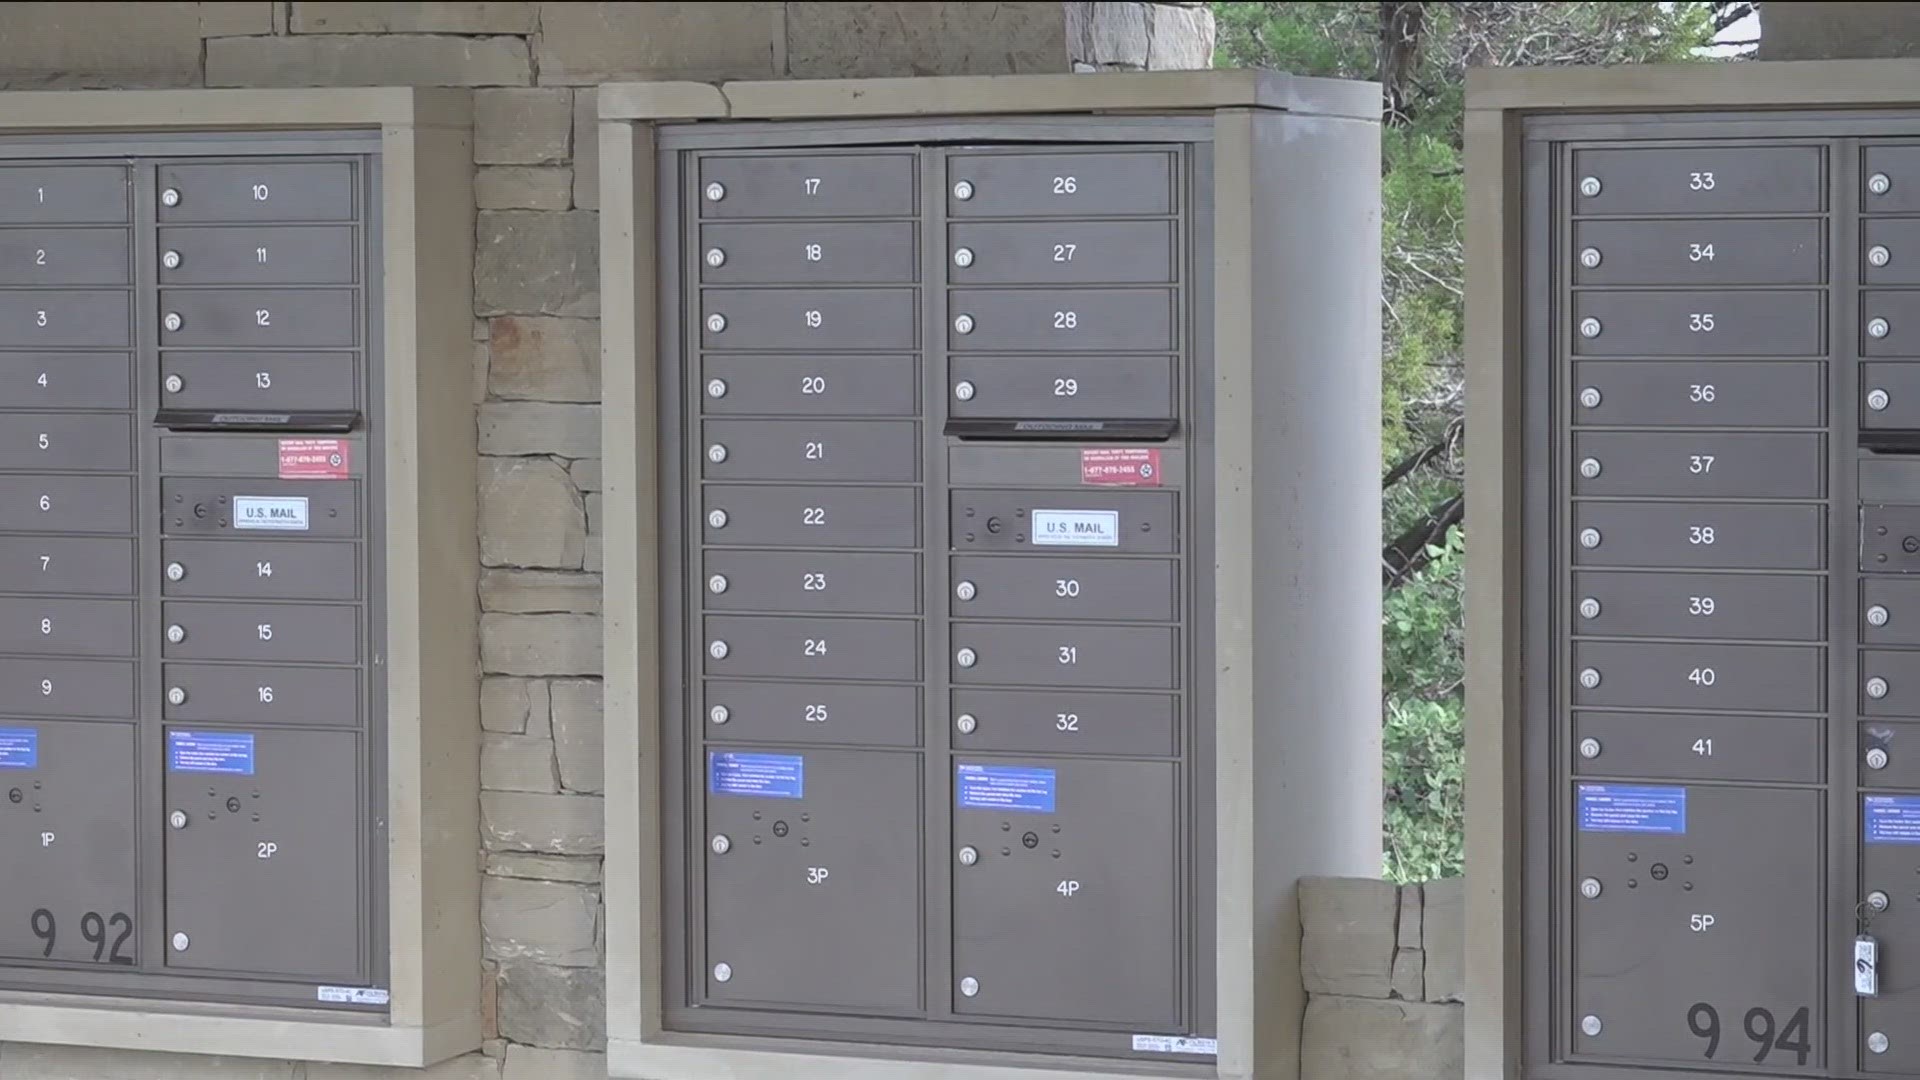 KVUE discovered a 2020 audit by the Office of Inspector General which found, "The Postal Service's management controls over arrow keys were ineffective."